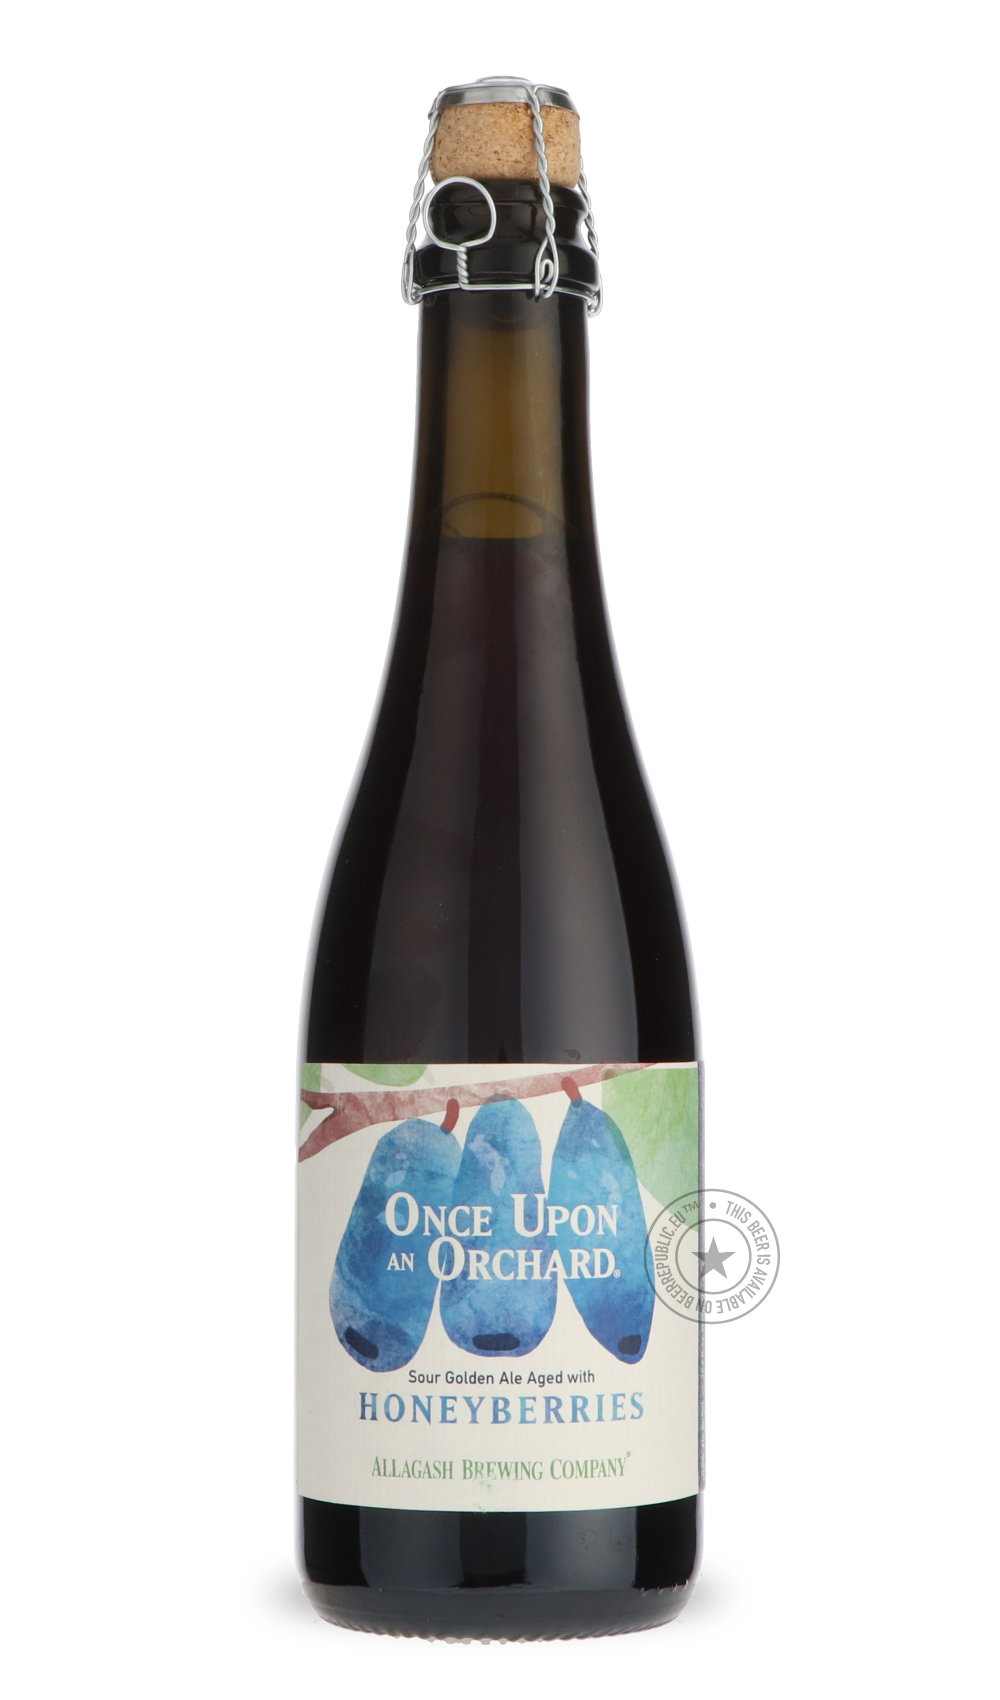 -Allagash- Once Upon An Orchard - Honeyberries-Sour / Wild & Fruity- Only @ Beer Republic - The best online beer store for American & Canadian craft beer - Buy beer online from the USA and Canada - Bier online kopen - Amerikaans bier kopen - Craft beer store - Craft beer kopen - Amerikanisch bier kaufen - Bier online kaufen - Acheter biere online - IPA - Stout - Porter - New England IPA - Hazy IPA - Imperial Stout - Barrel Aged - Barrel Aged Imperial Stout - Brown - Dark beer - Blond - Blonde - Pilsner - La